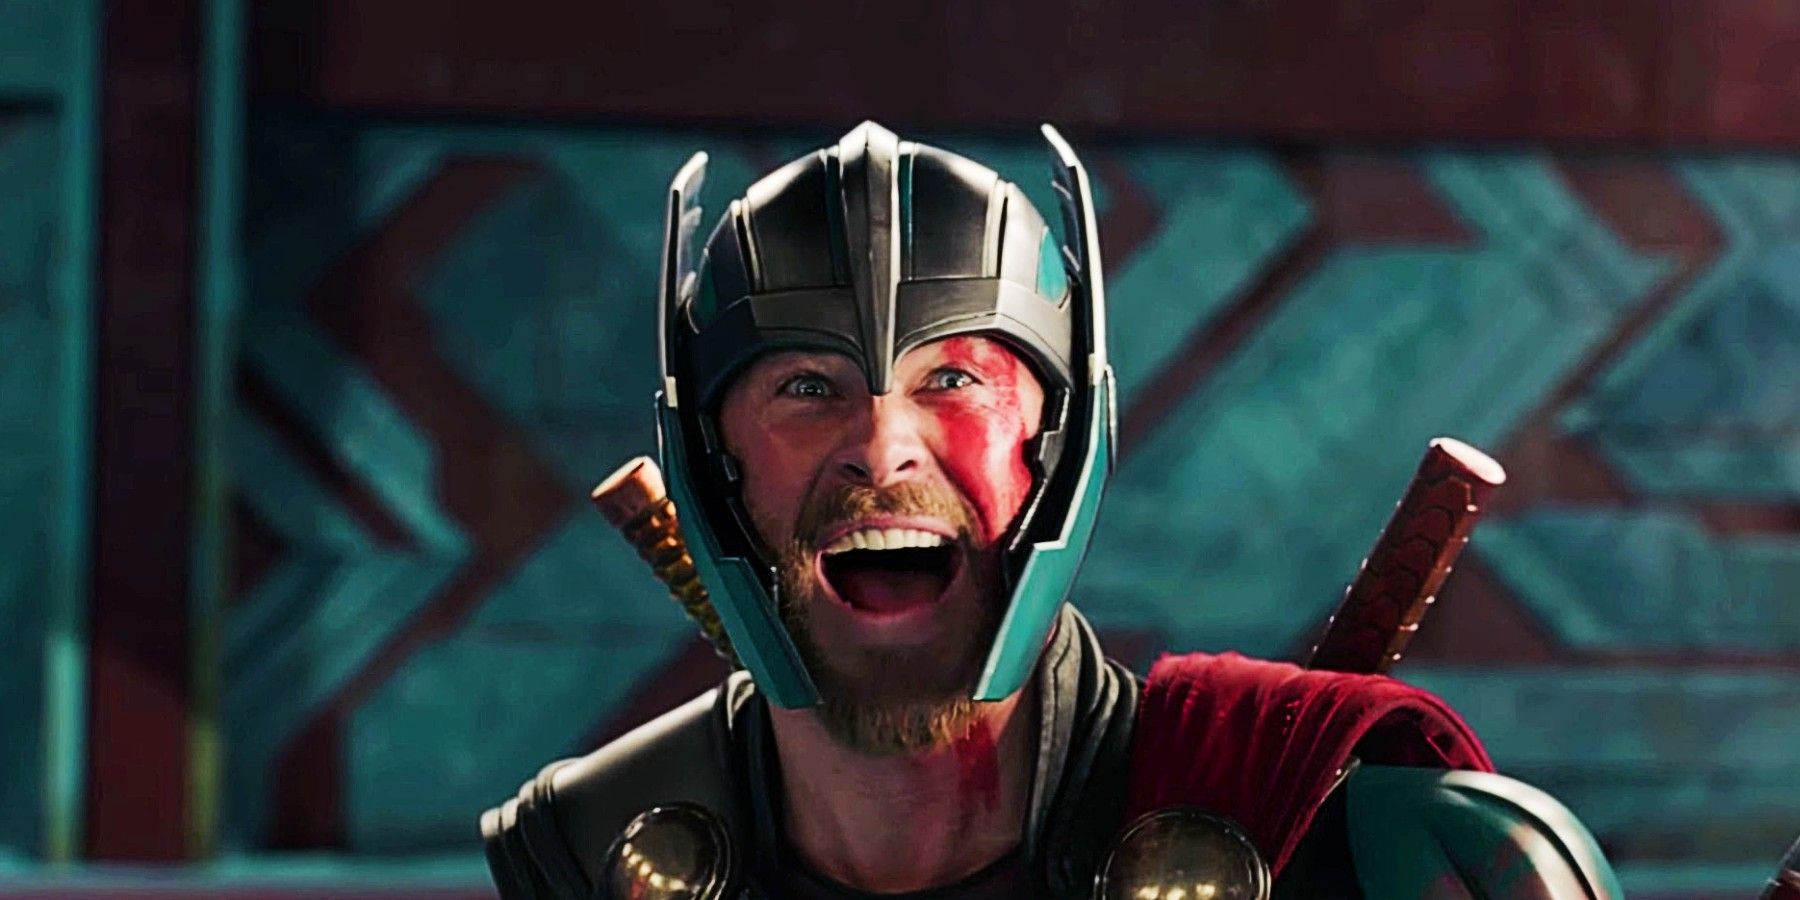 Thor laughing as he prepares for battle in Thor: Ragnarok.